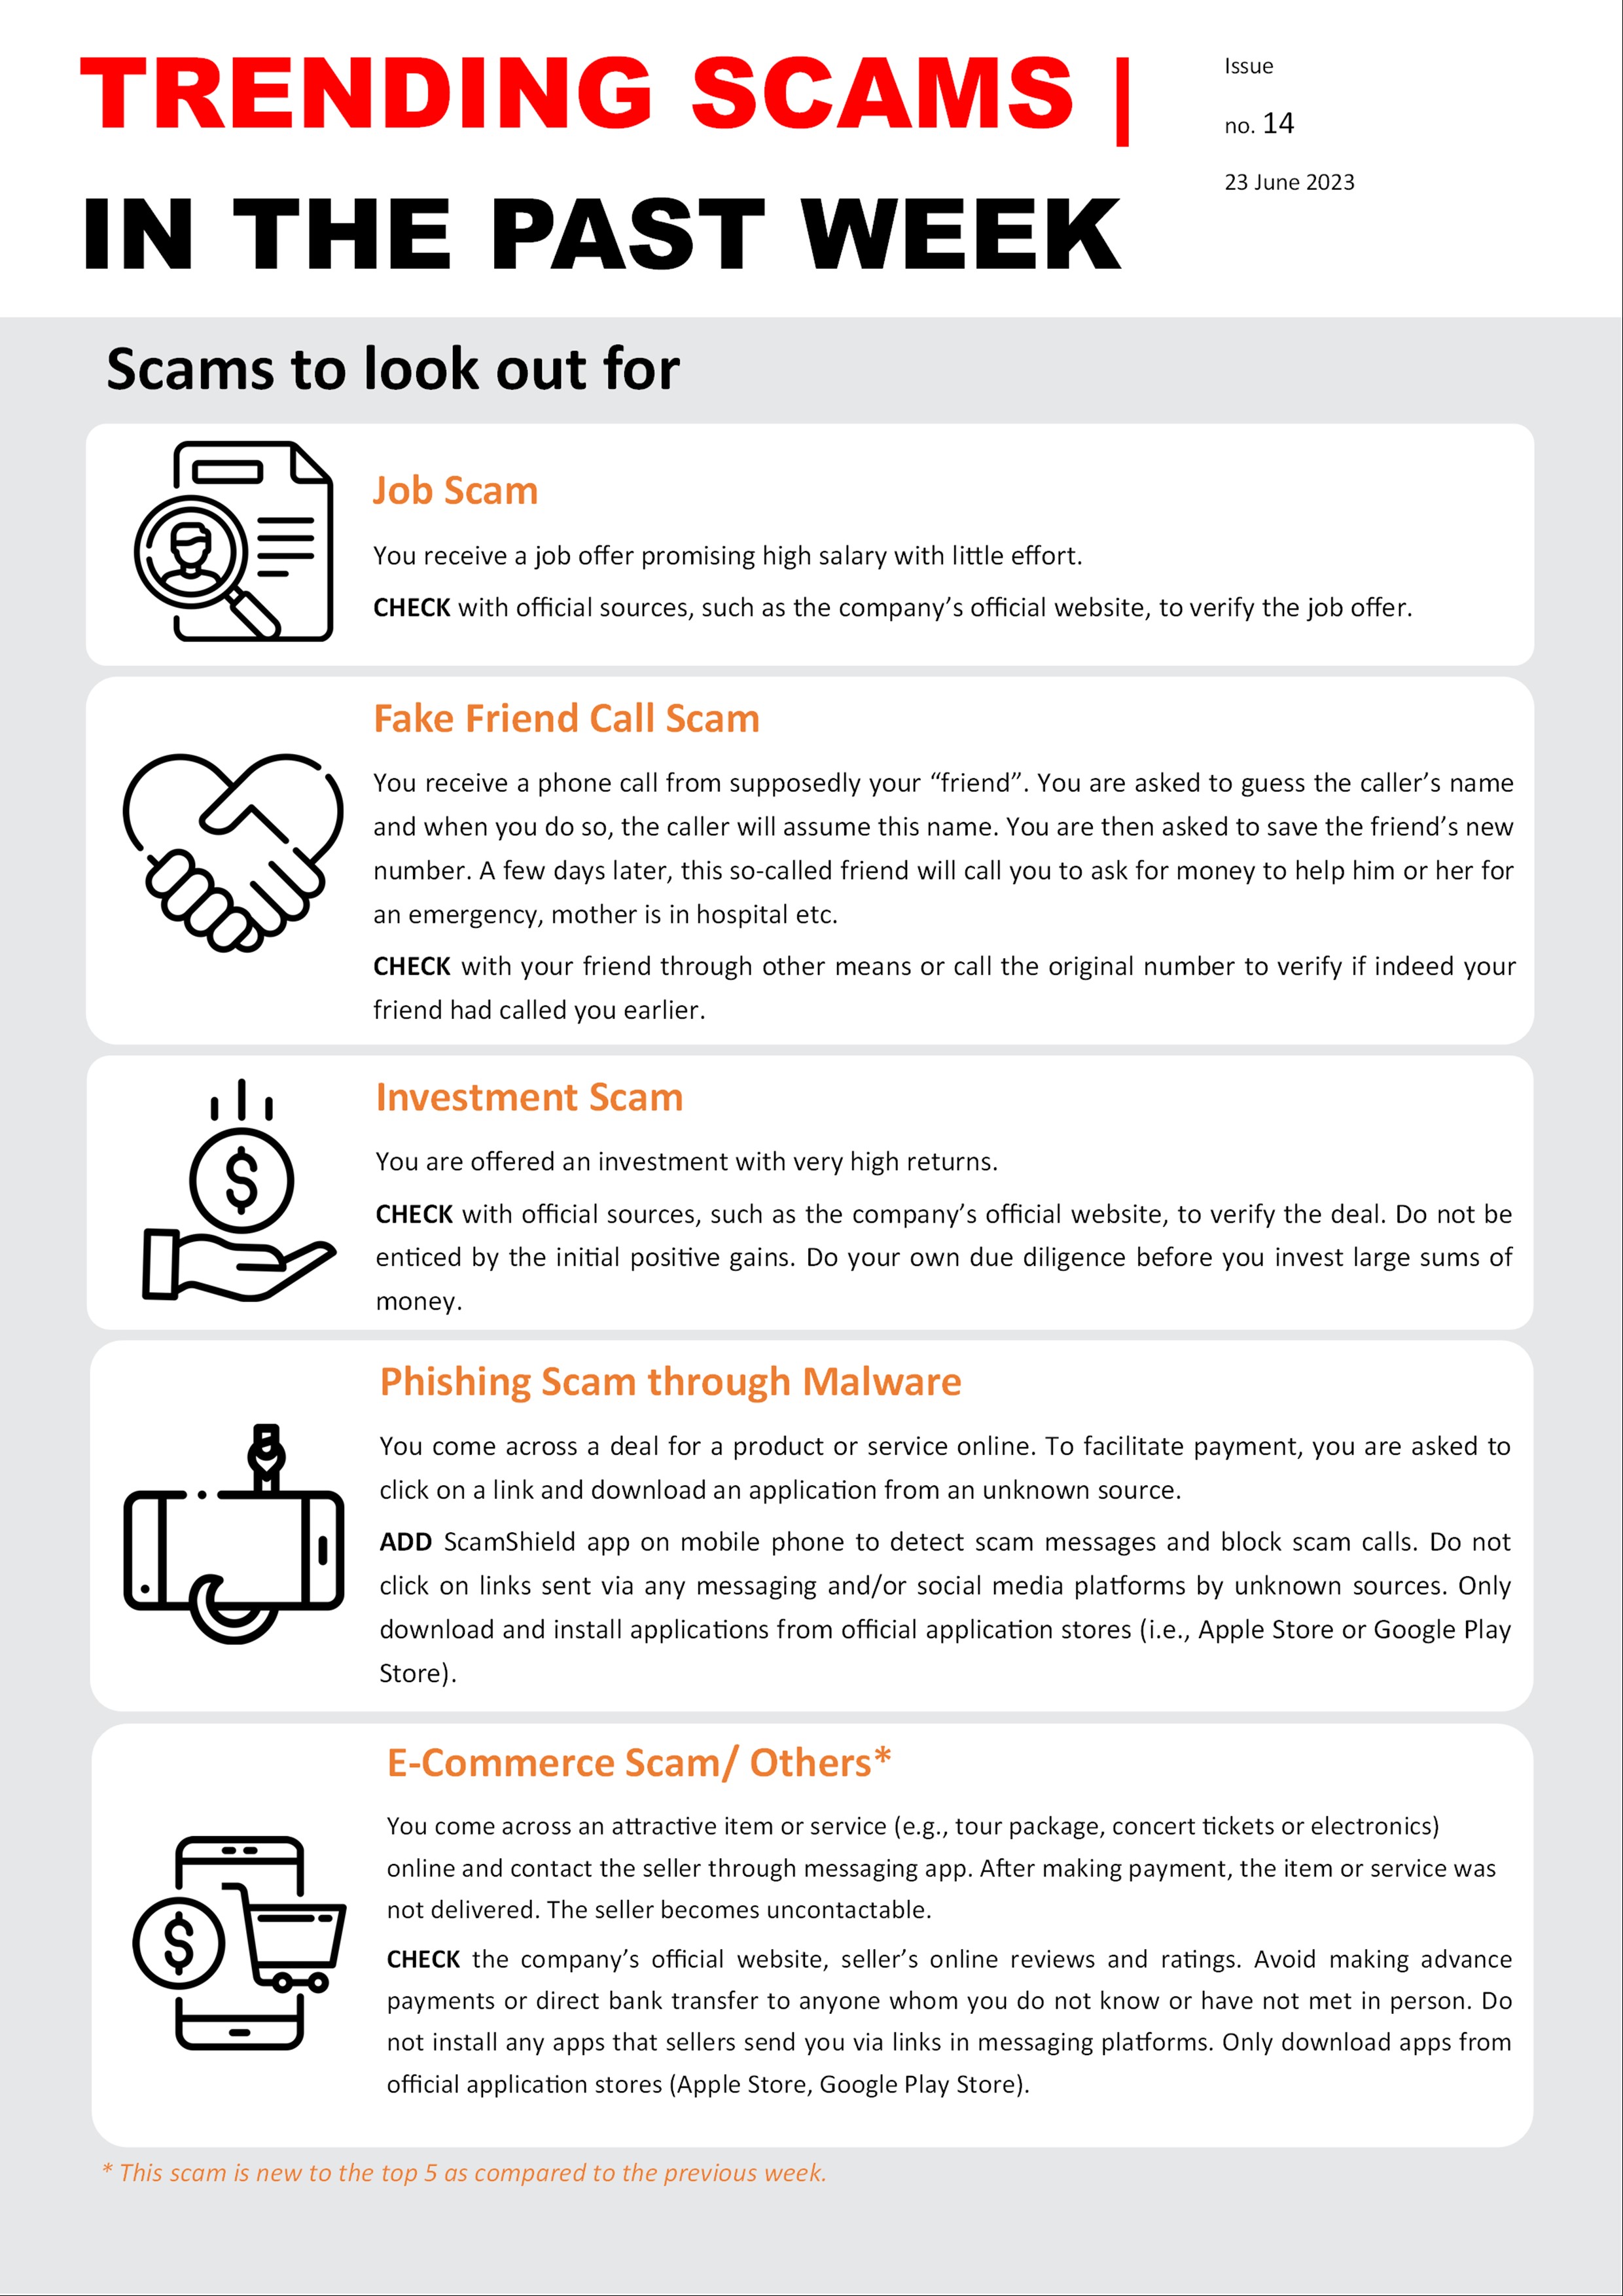 Trending Scams in the Past Week Issue No 14